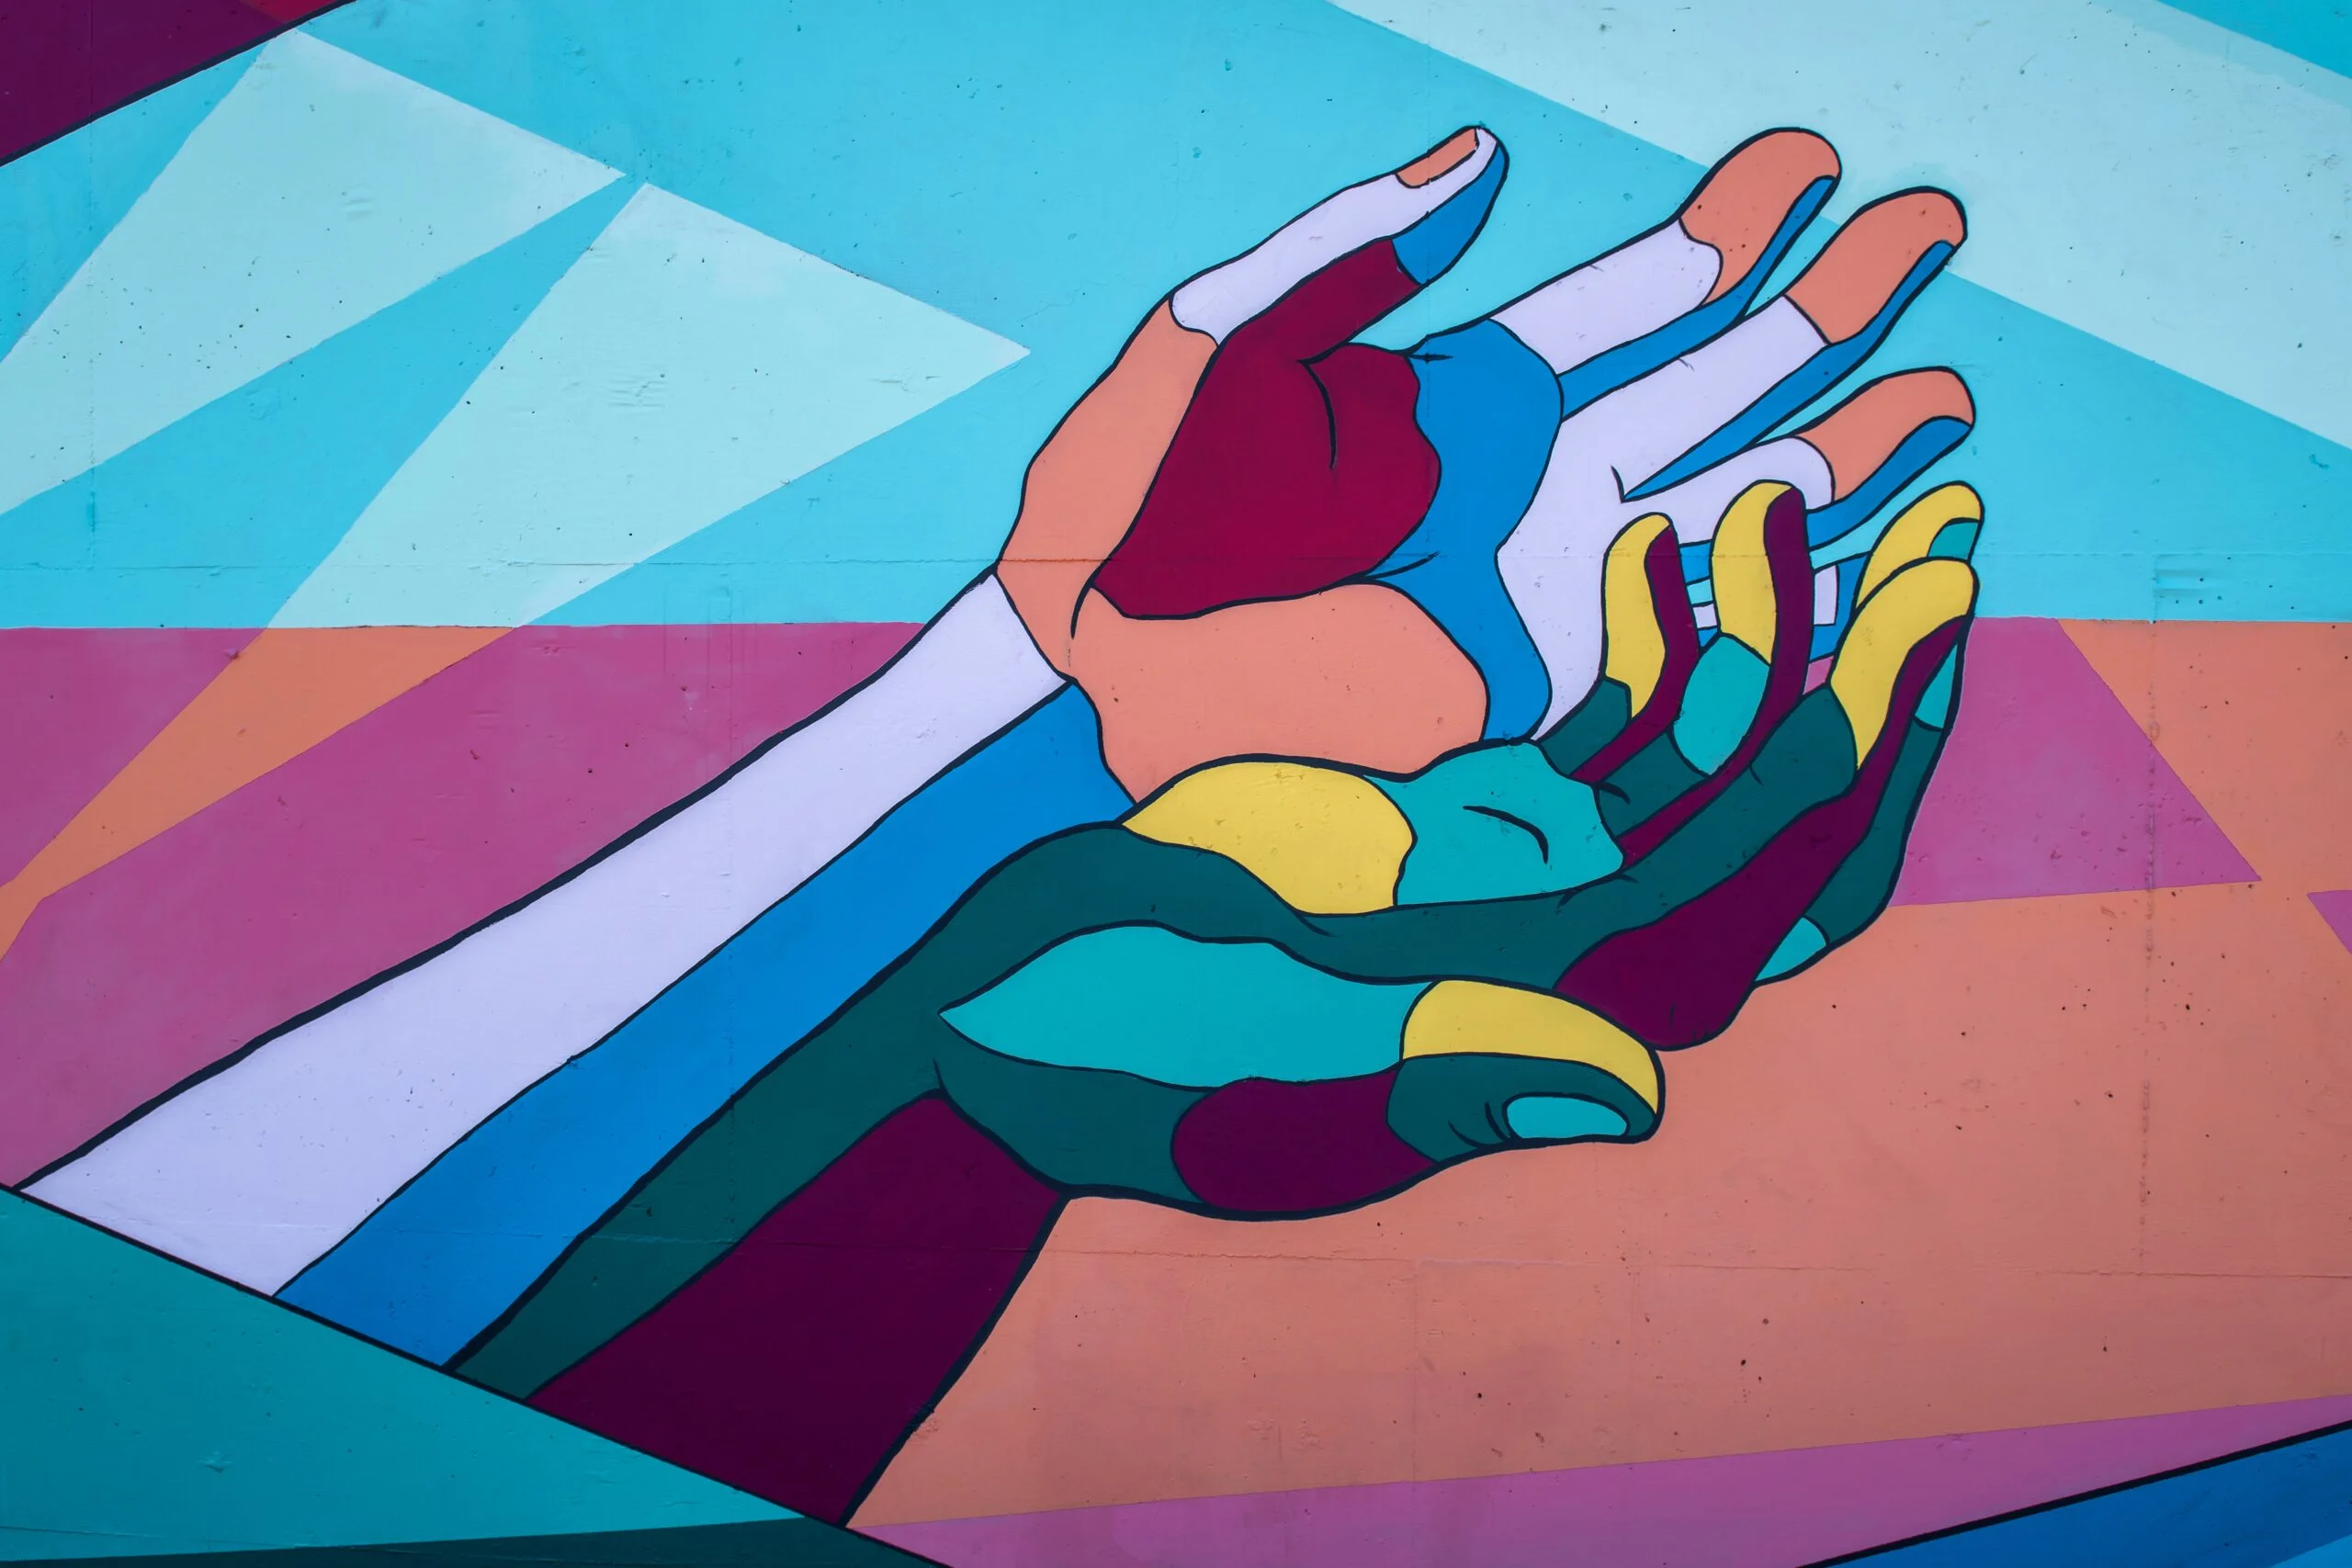 A vibrant painting of two hands reaching out to each other, showcasing the beauty of human connection.